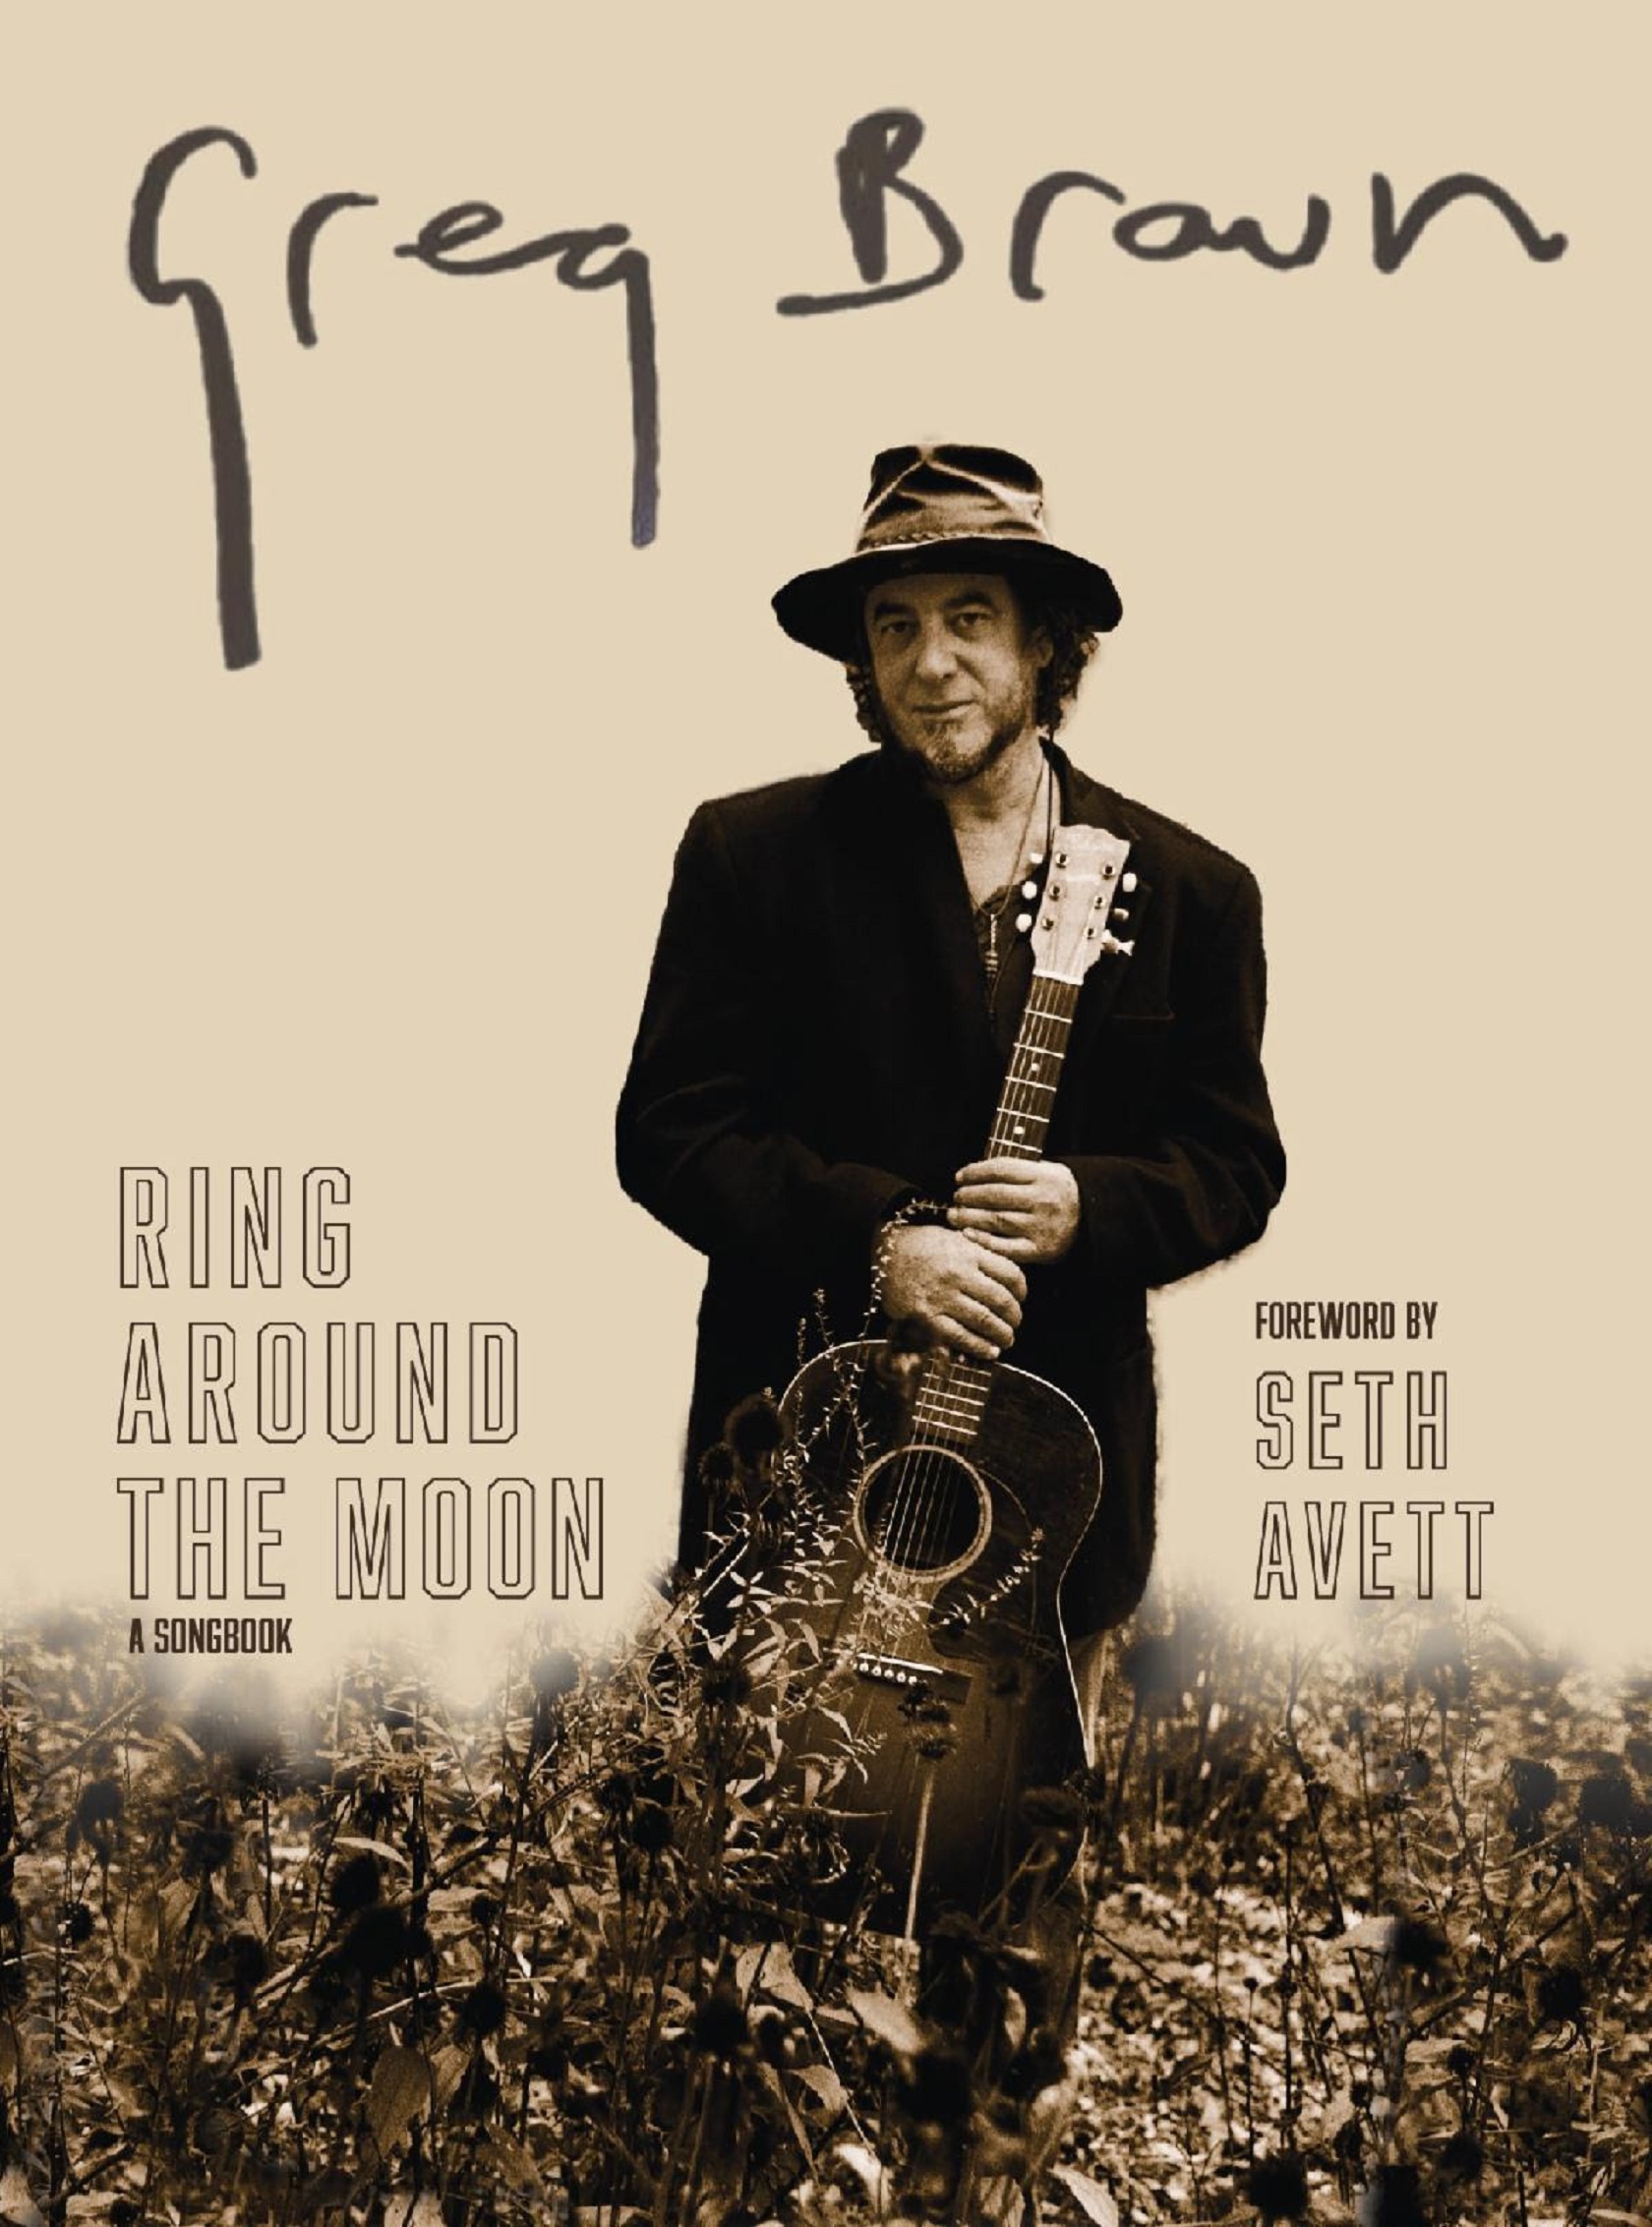 GREG BROWN The renowned Iowa folk artist to release Ring Around The Moon, A Songbook